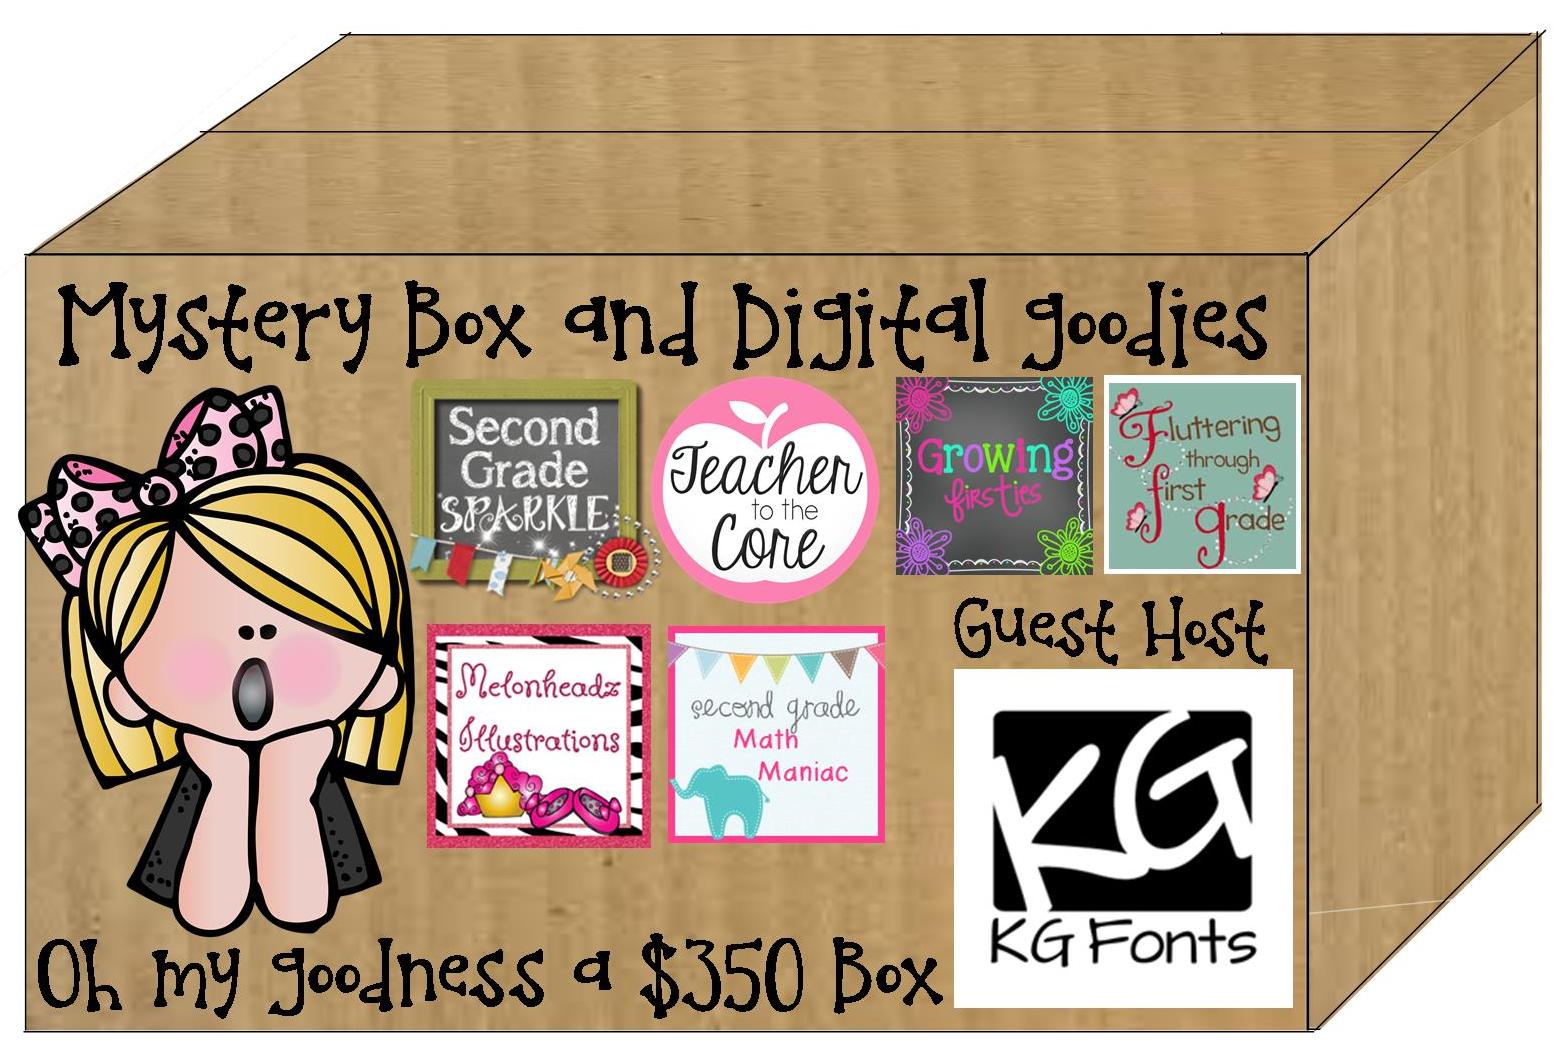 http://www.flutteringthroughfirstgrade.com/2014/01/the-mystery-box-is-back-with-bang.html